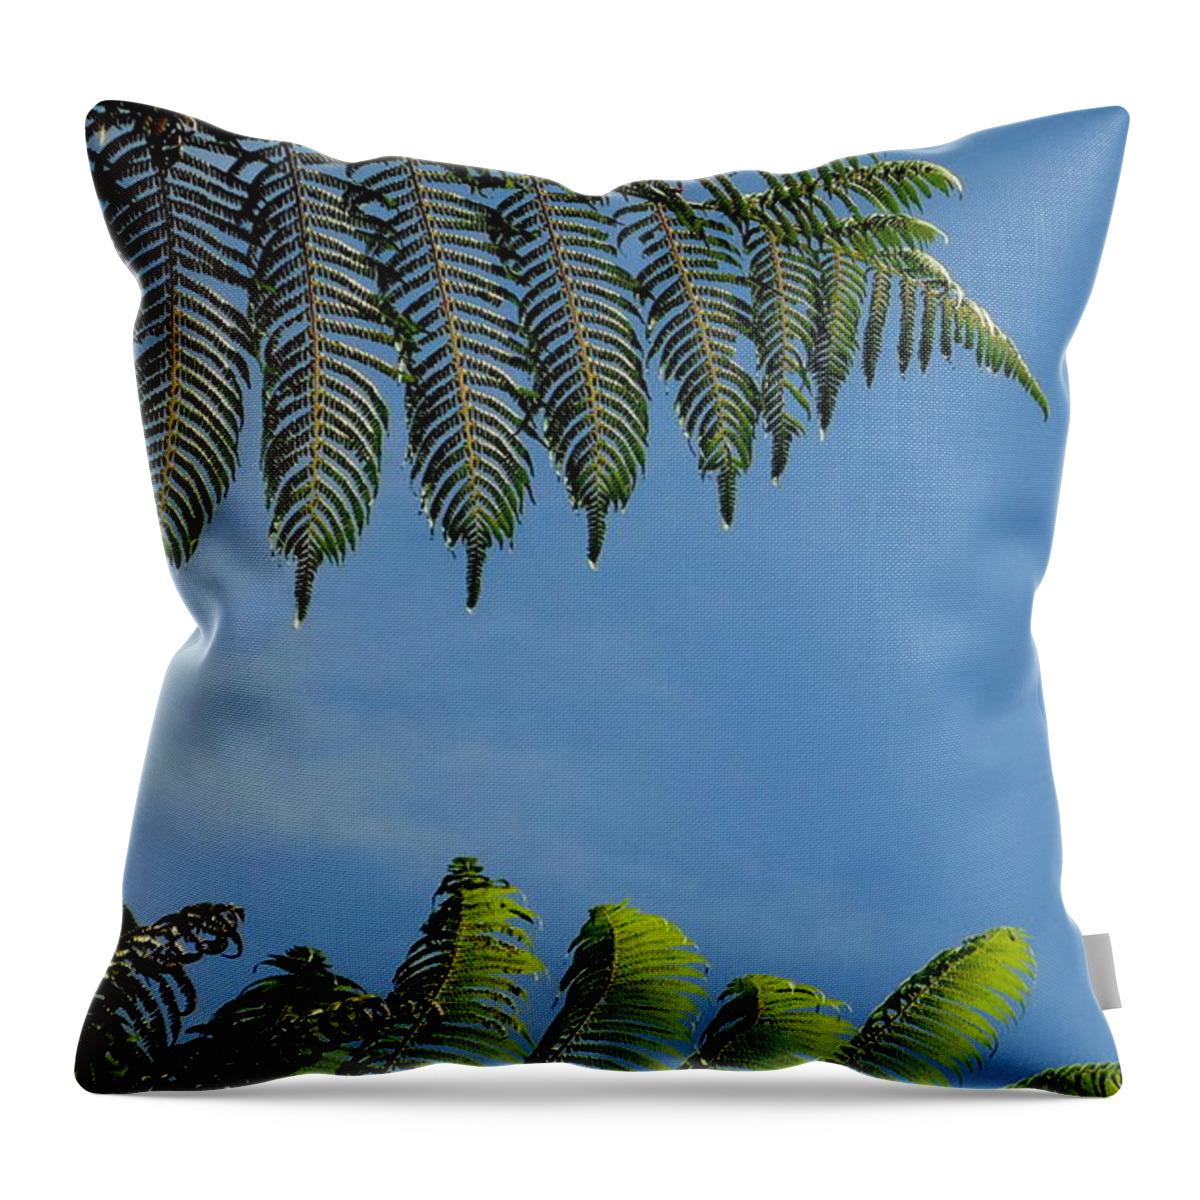 Tree Fern Throw Pillow featuring the photograph Tree Fern Abstract by Peter Mooyman